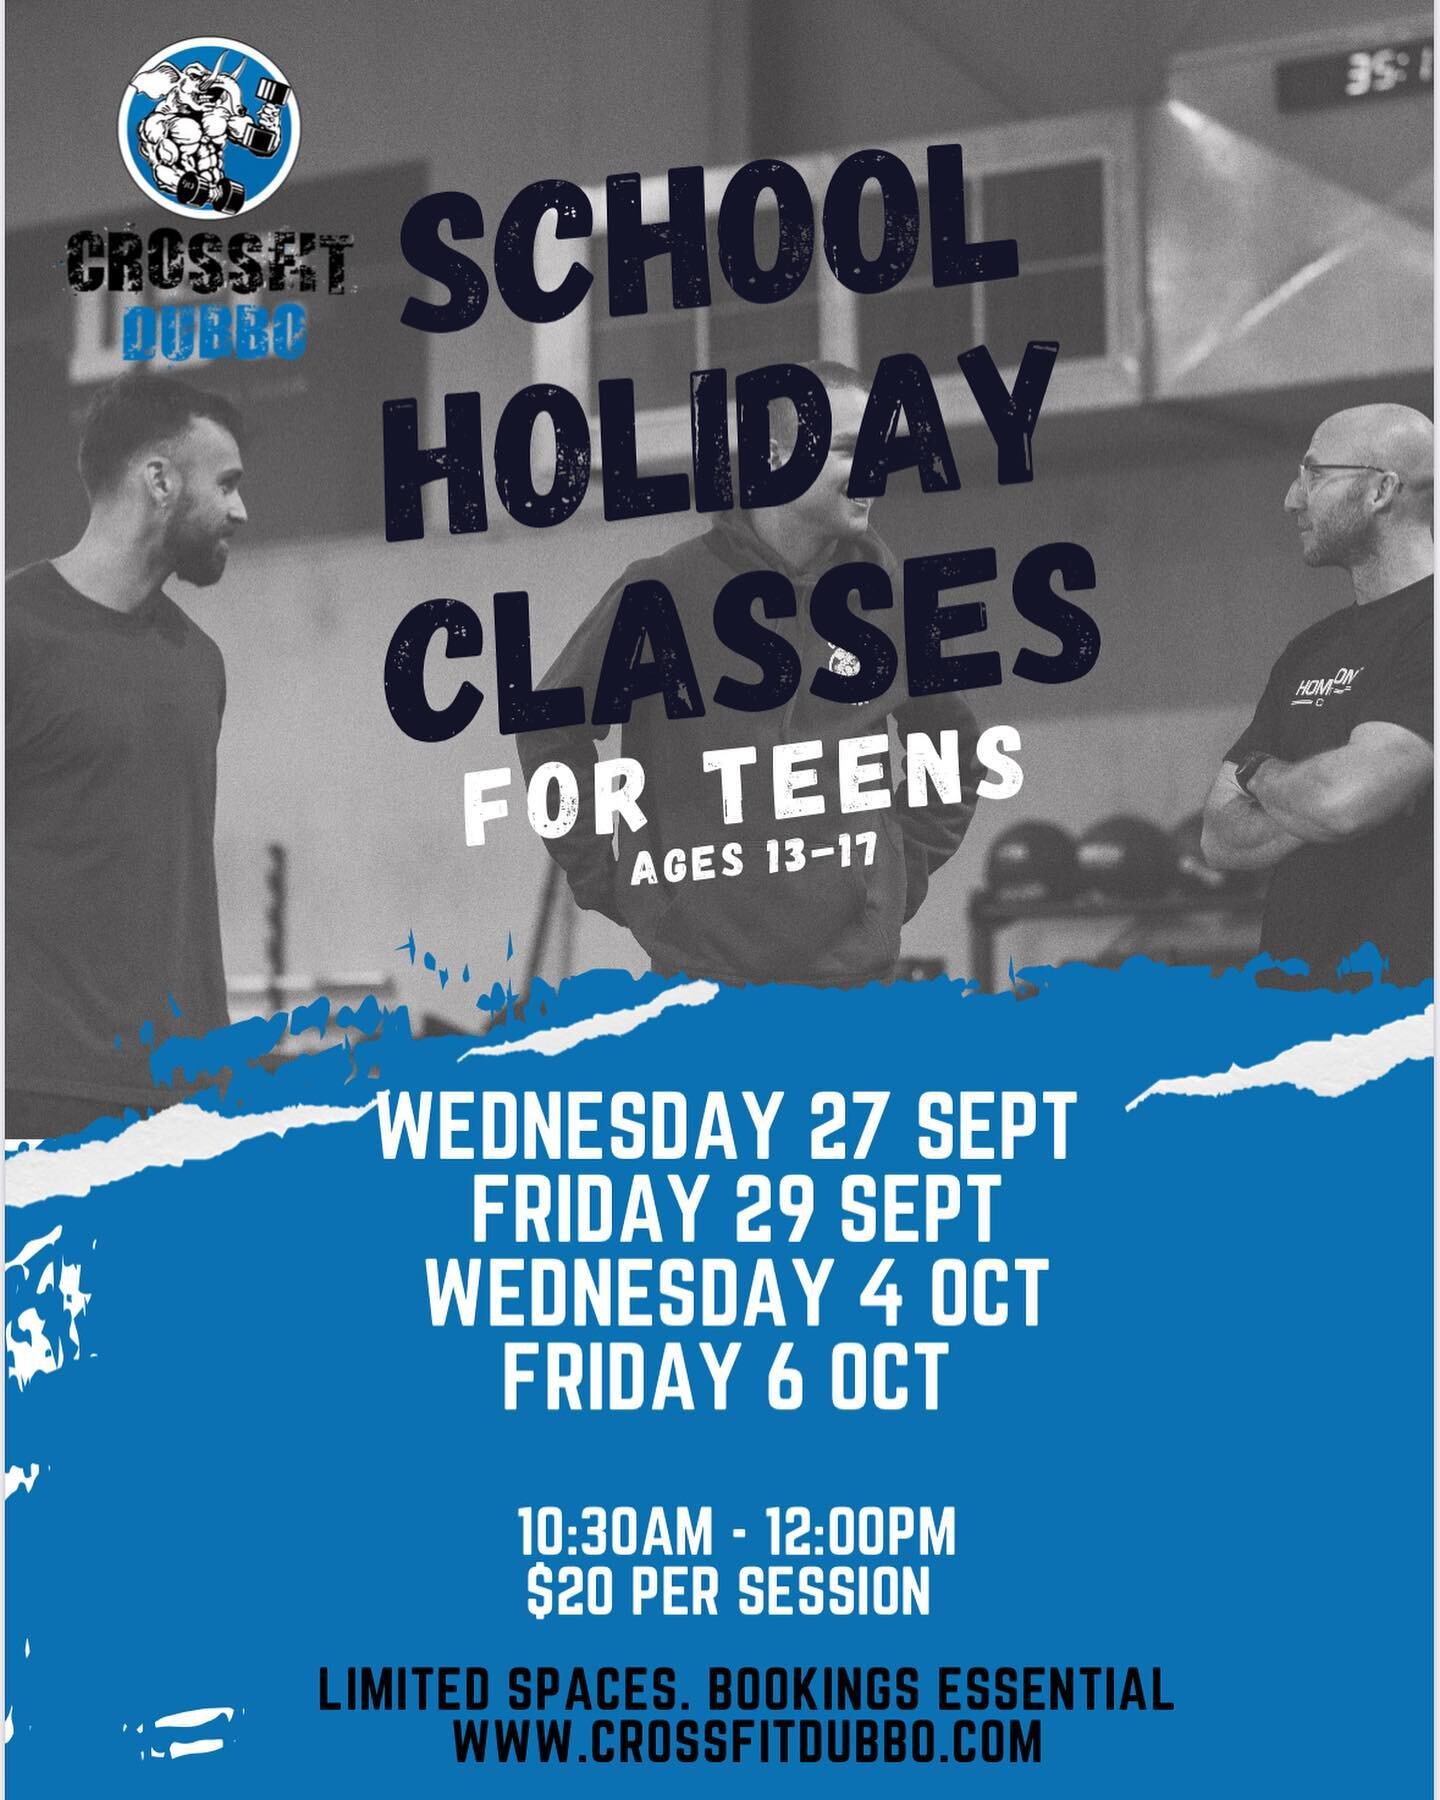 Looking for something for the teenagers to do it the holidays?
We are running a few &ldquo;teens only&rdquo; classes in the coming school holidays.

Send us a DM, give us a call or book in on our website. 

#crossfit #teenagers #schoolholidays #dubbo